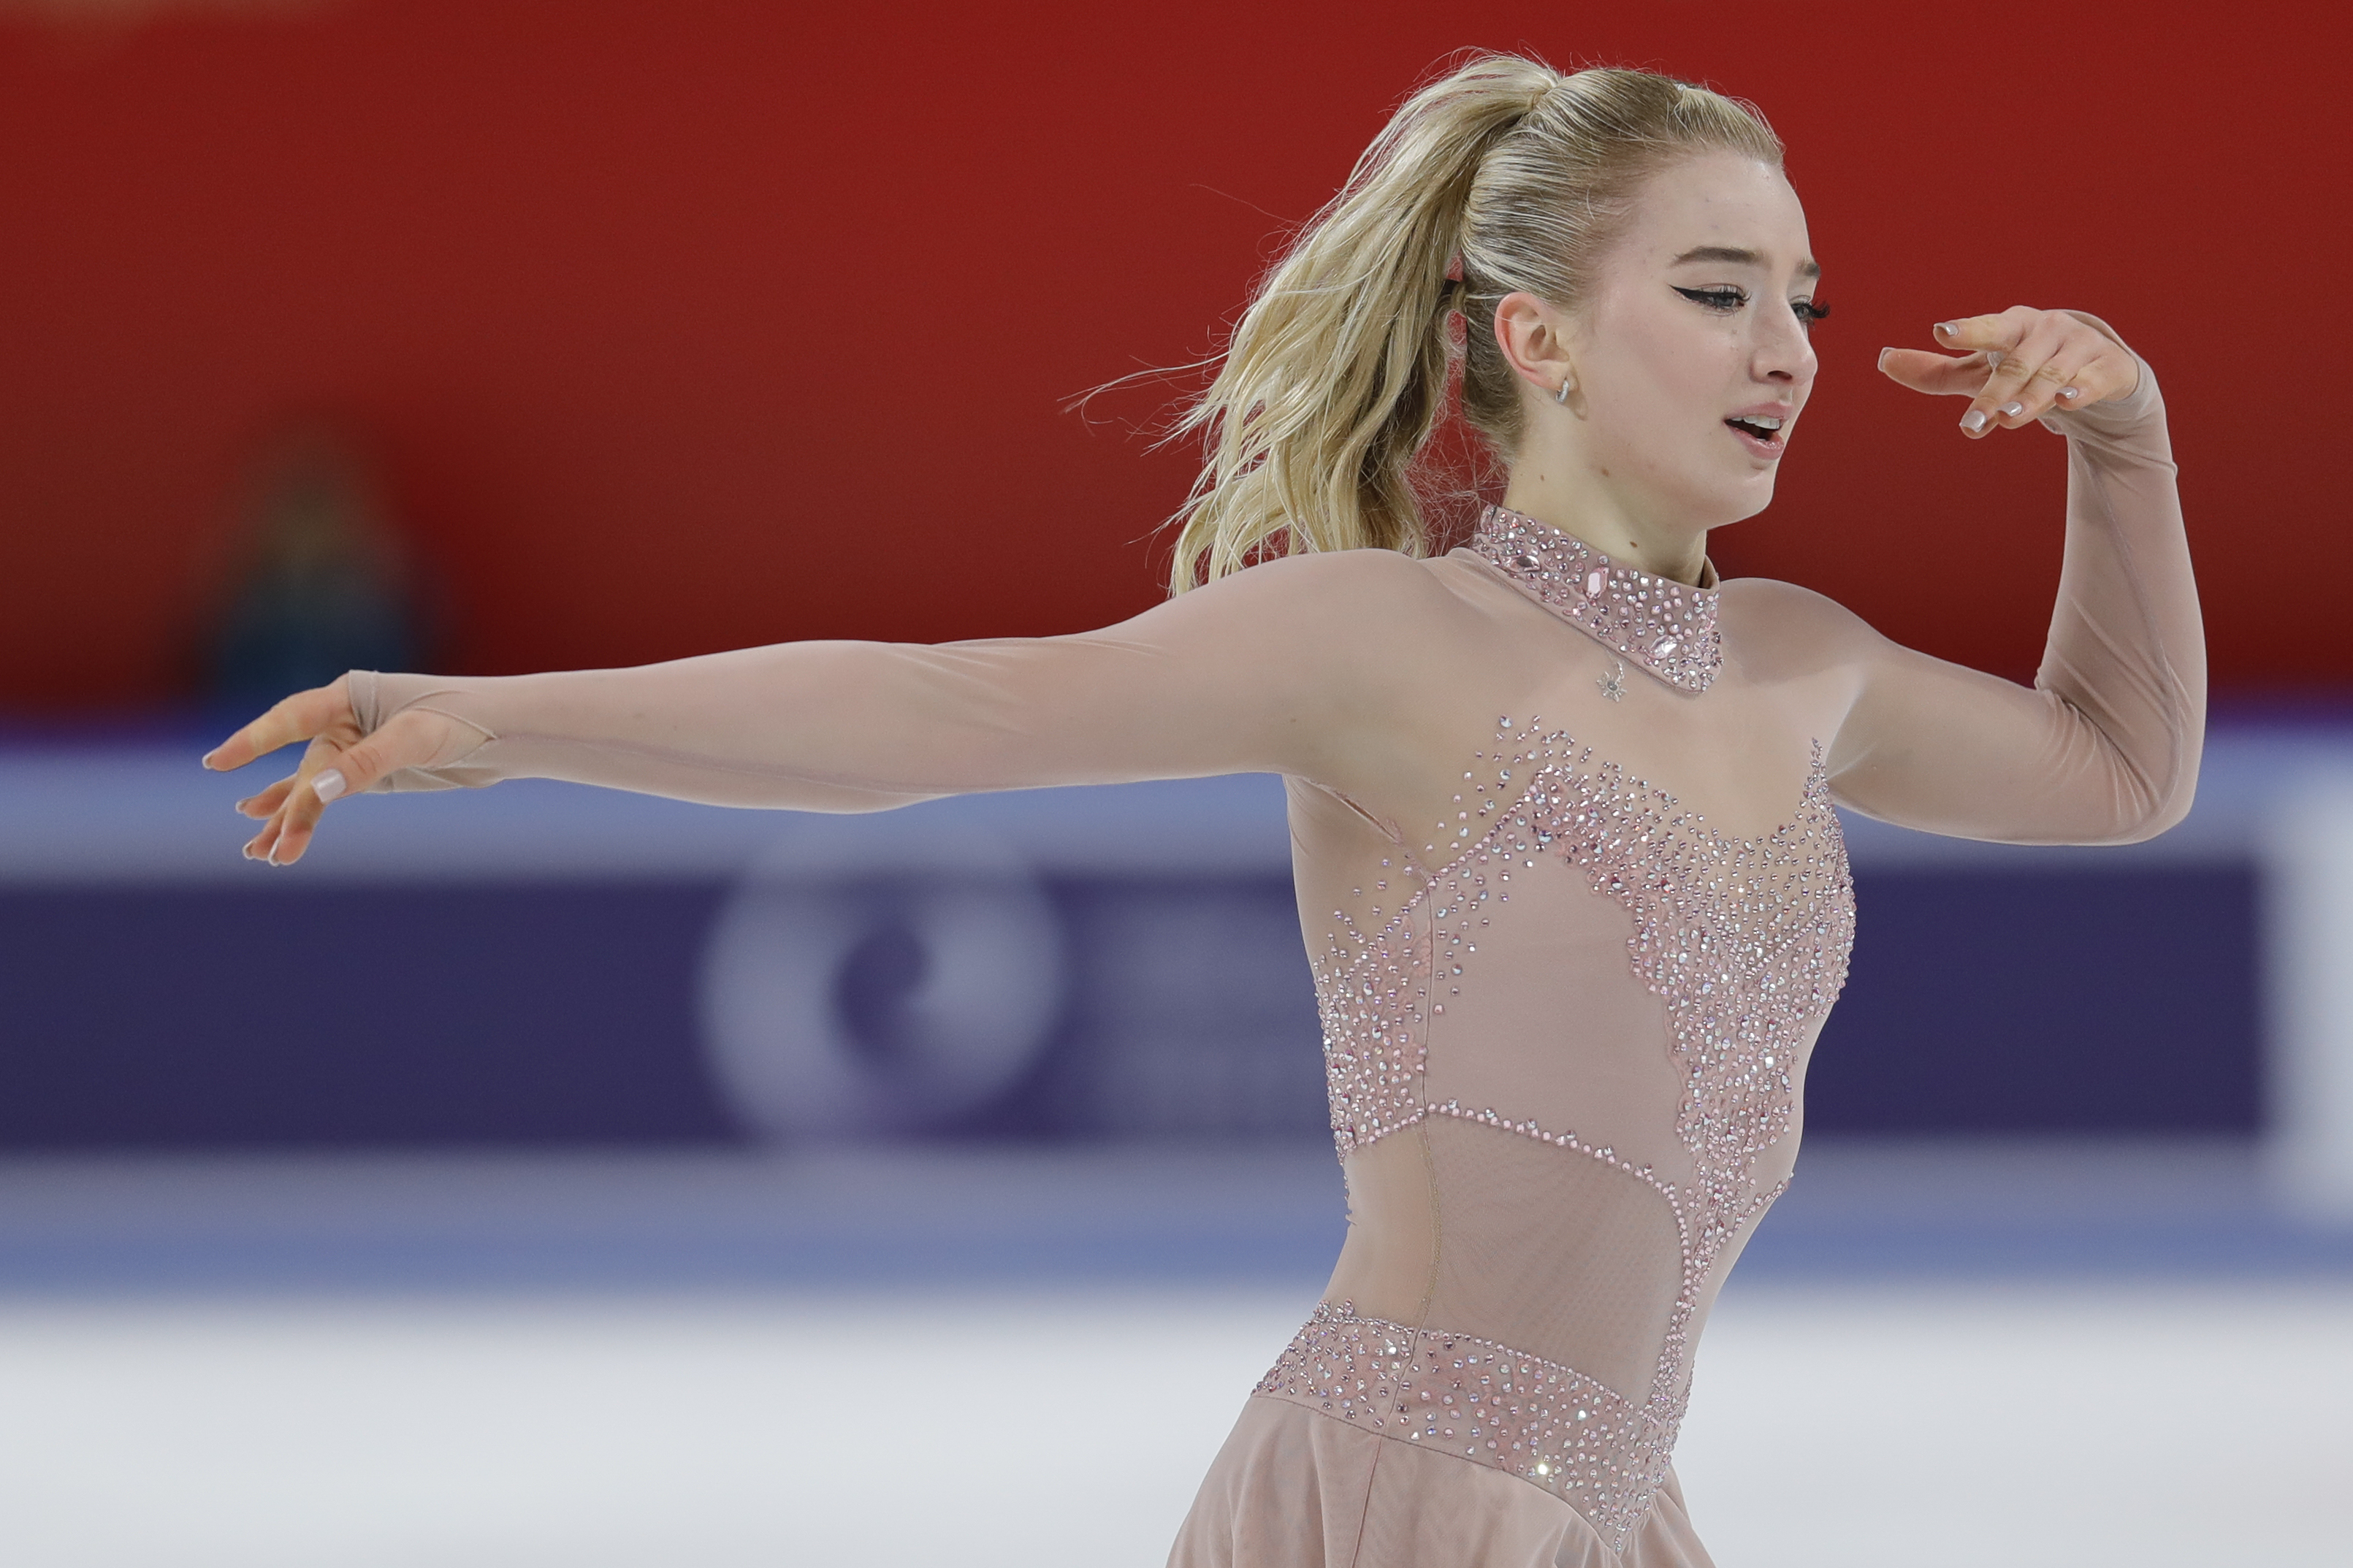 Elite US figure skater Amber Glenn comes out as bisexual/pansexual photo